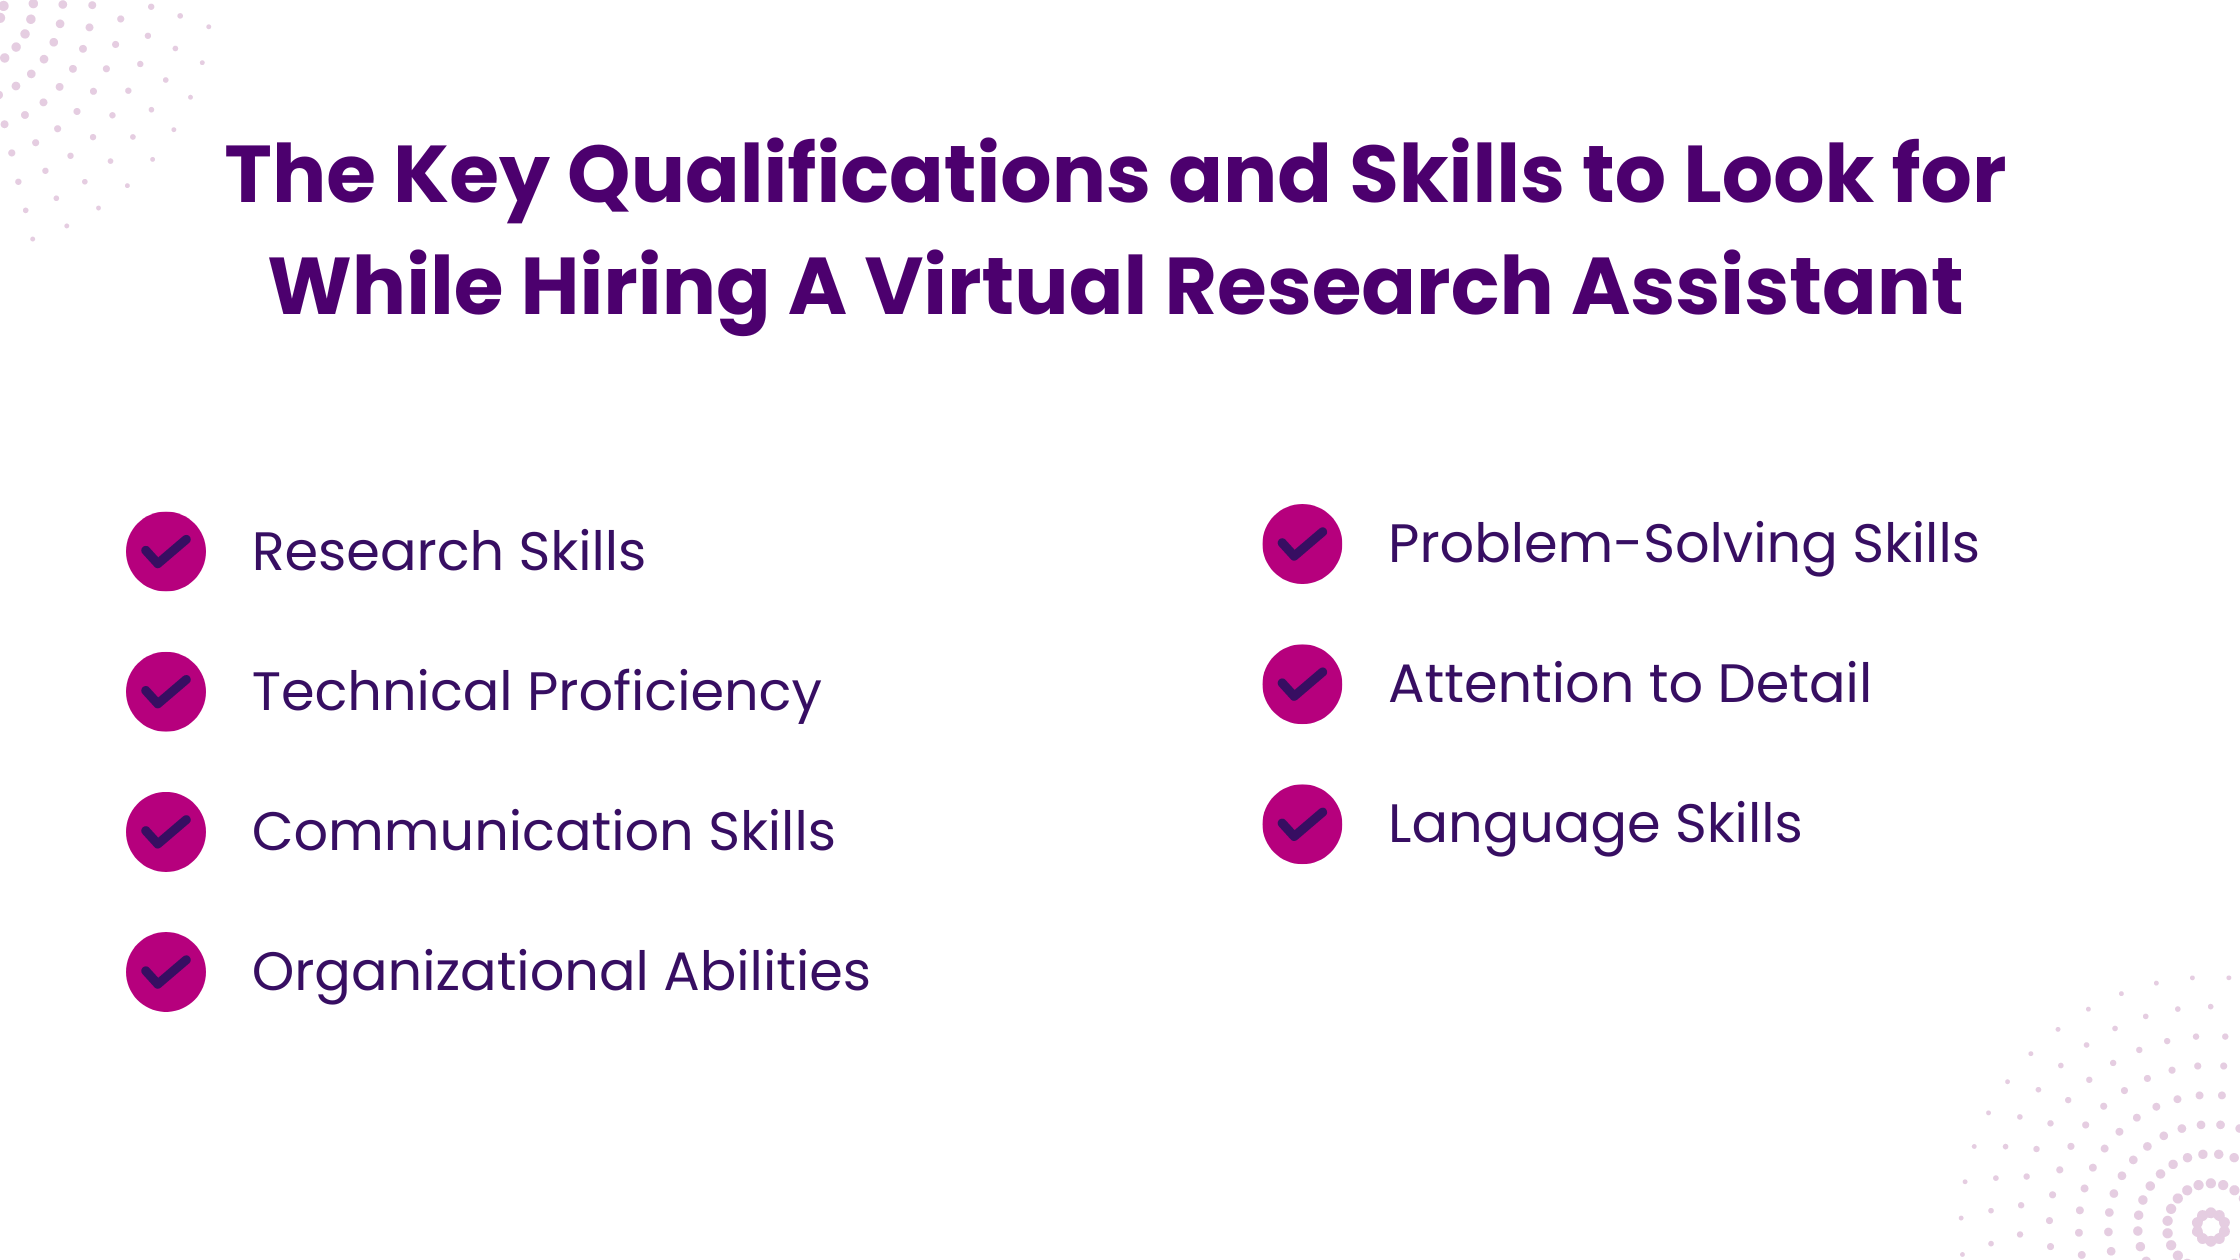 The Key Qualifications and Skills to Look for While Hiring A Virtual Research Assistant